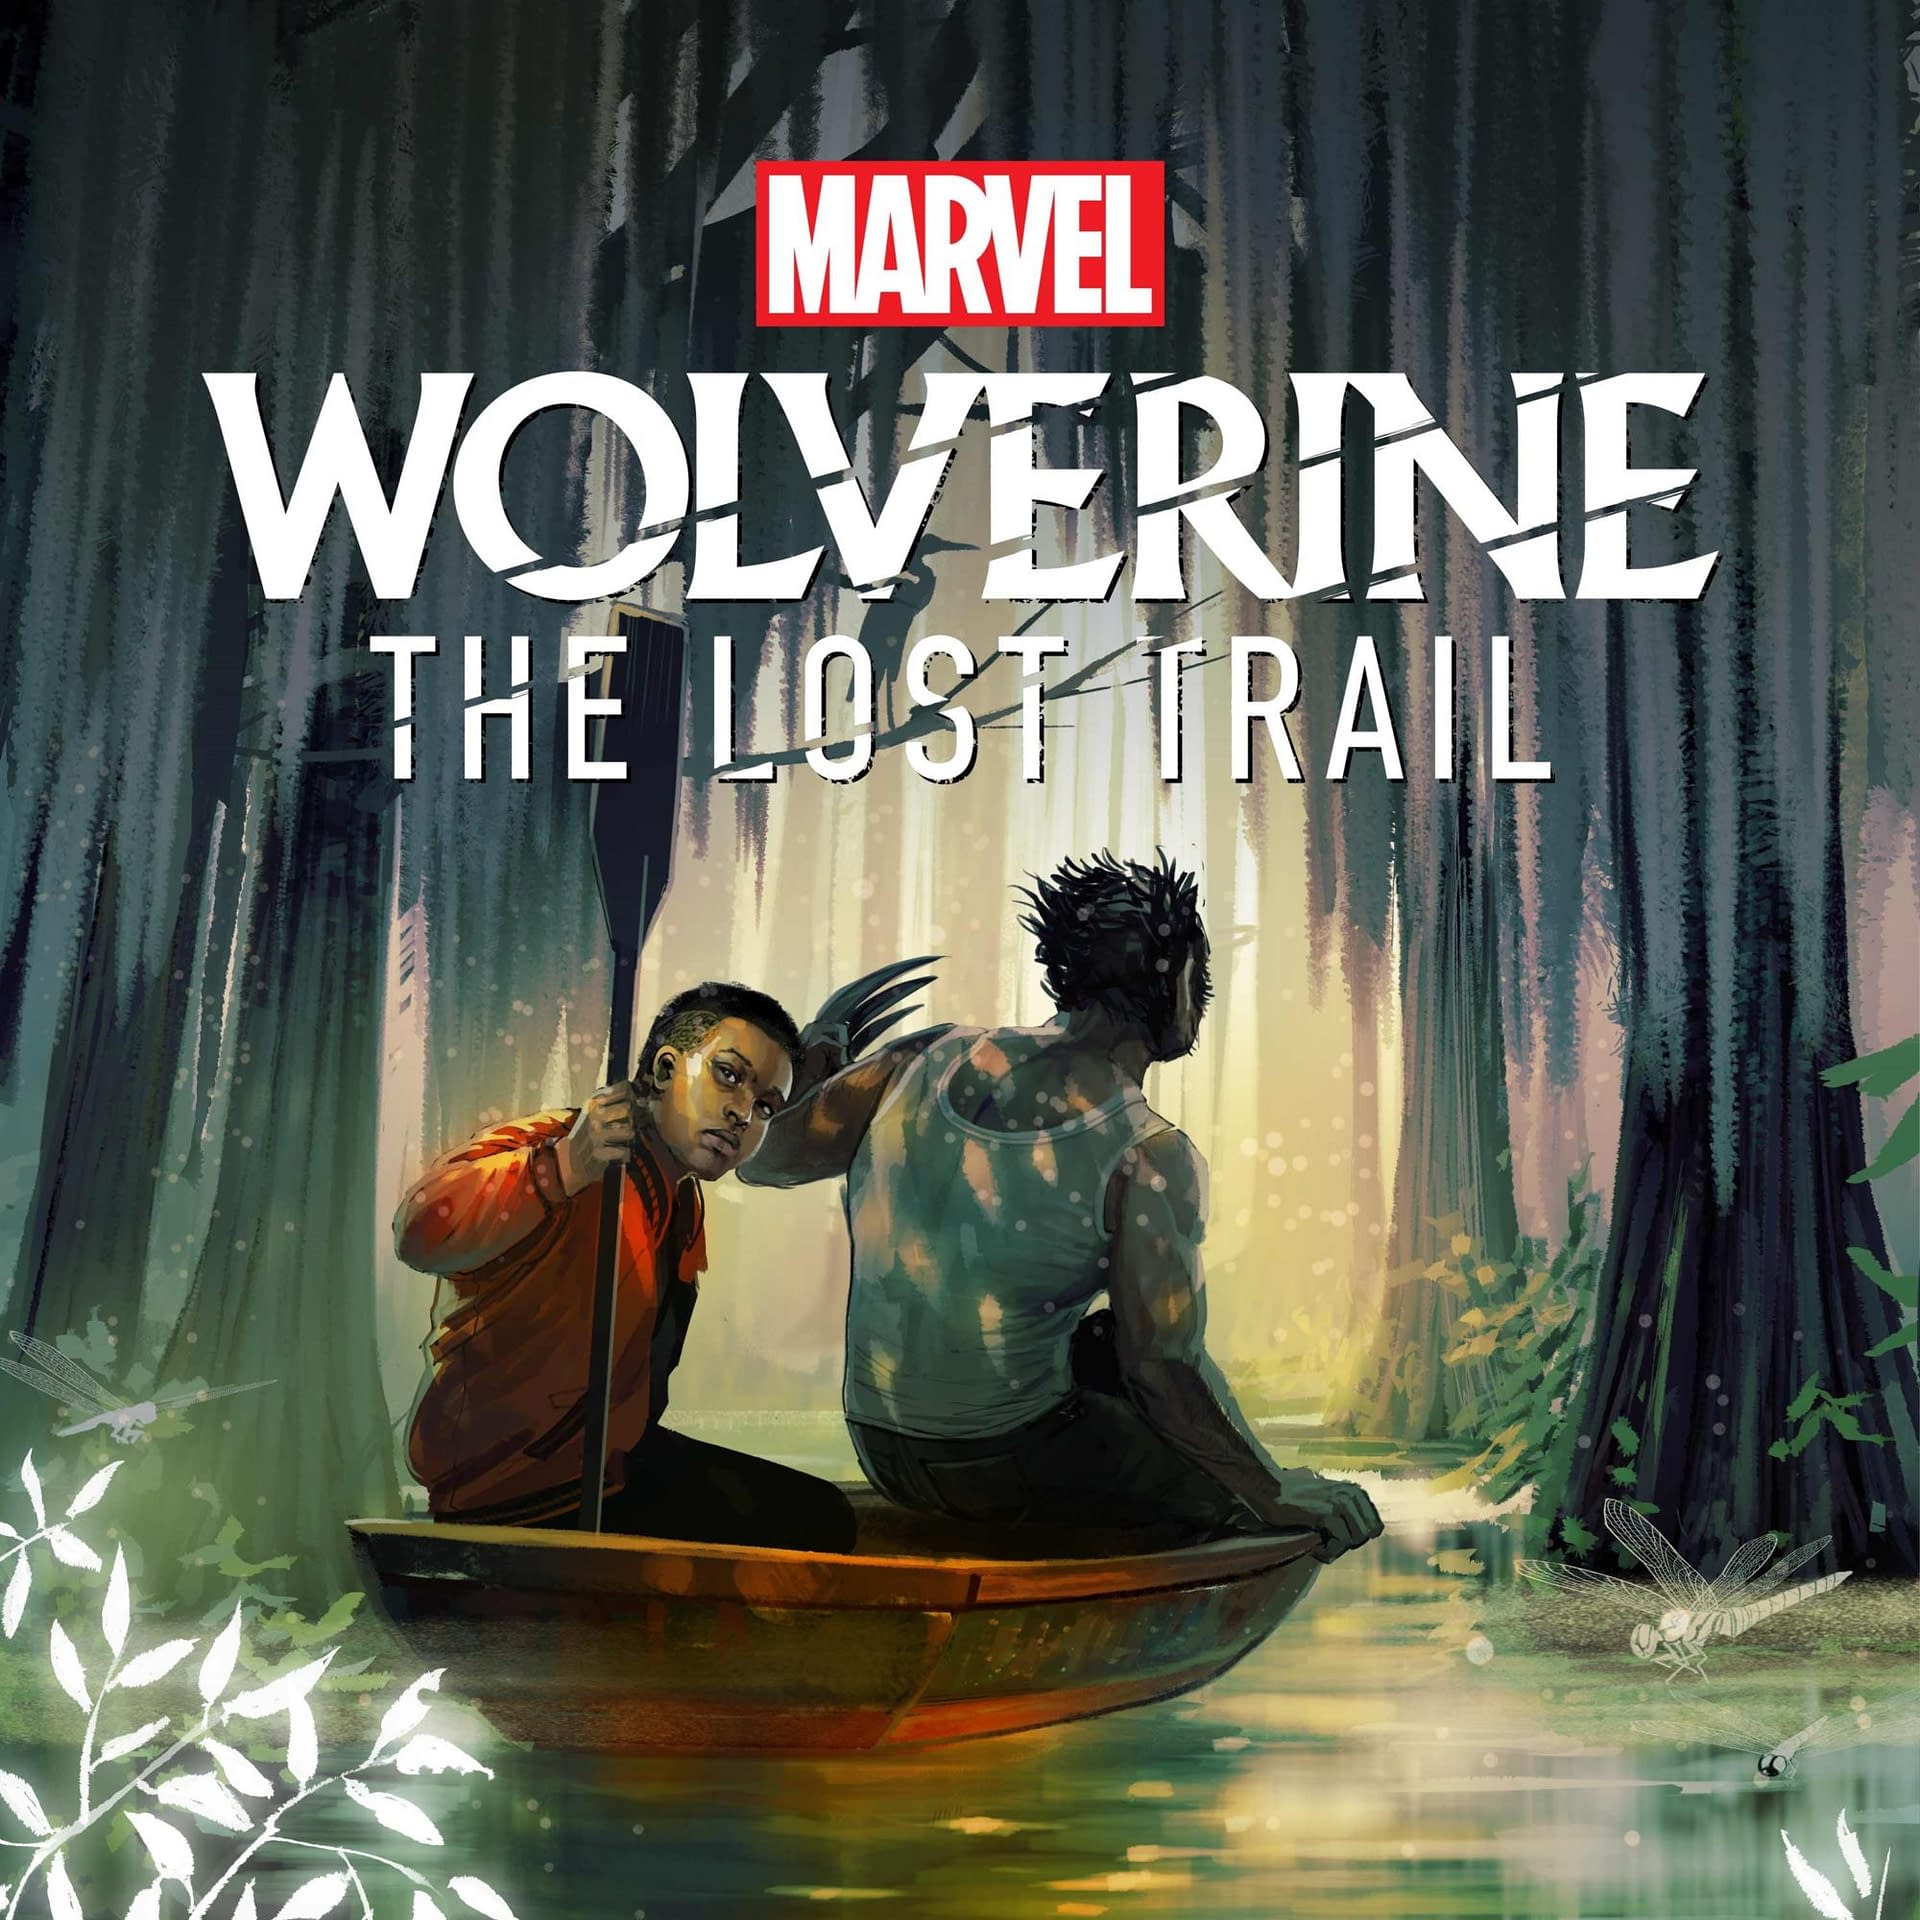 marvels wolverine lost trail